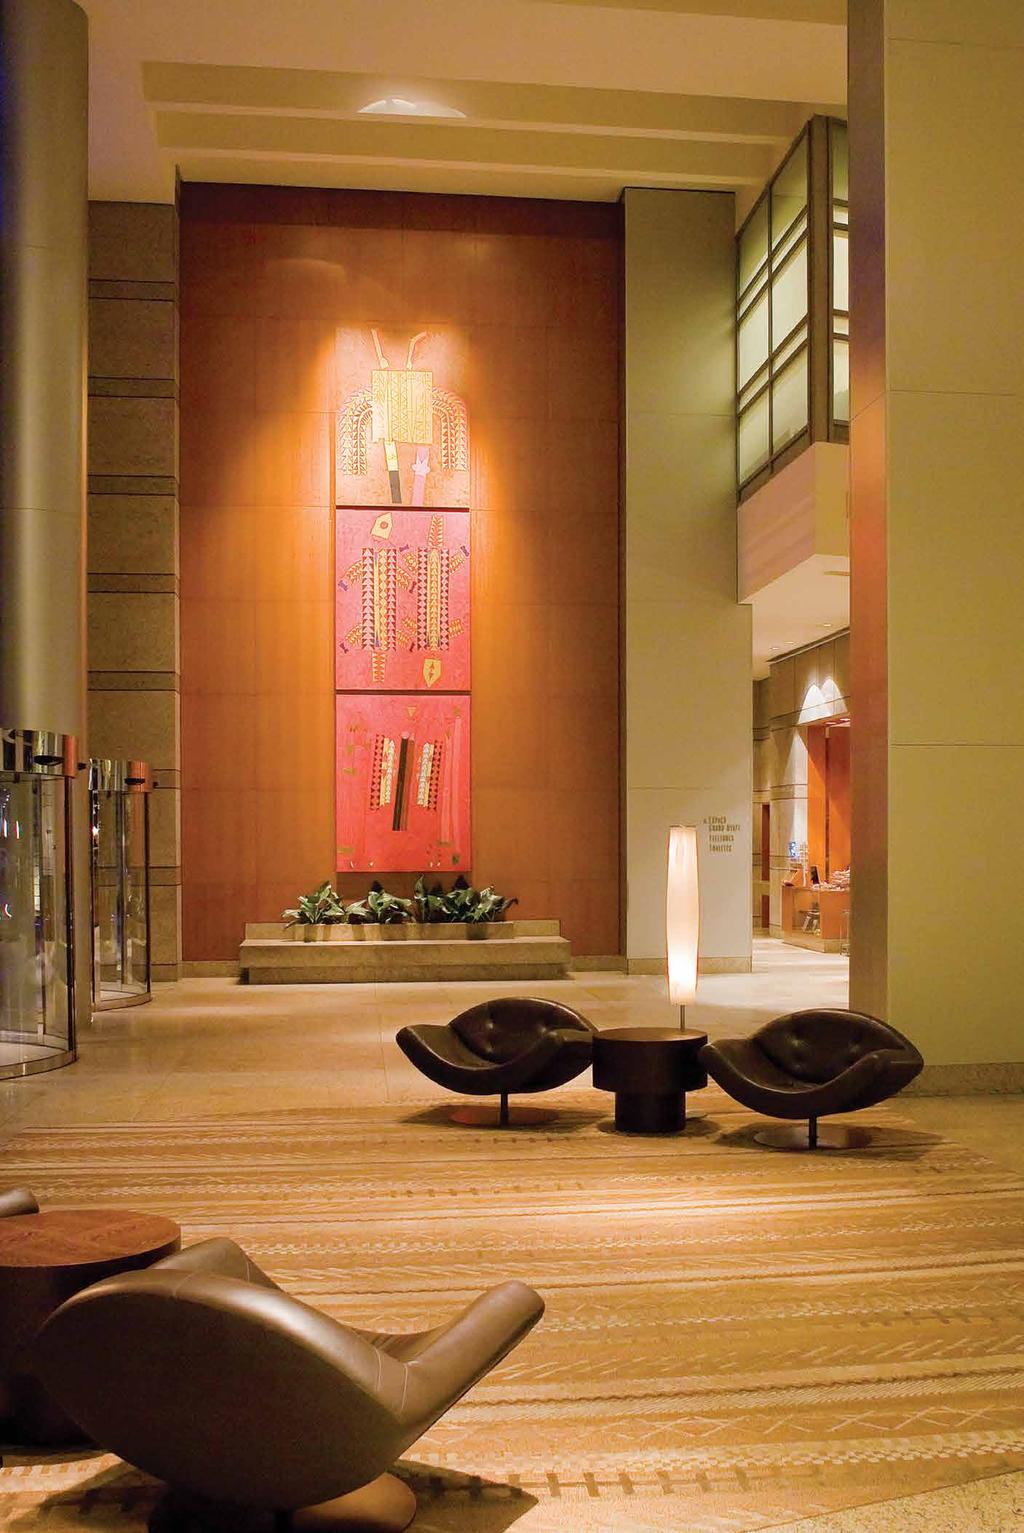 Grand Hyatt São Paulo welcome Experience distinguished style, exceptional standards and the authentic hospitality that makes guests feel more than welcome, synonymous with the Hyatt name worldwide.